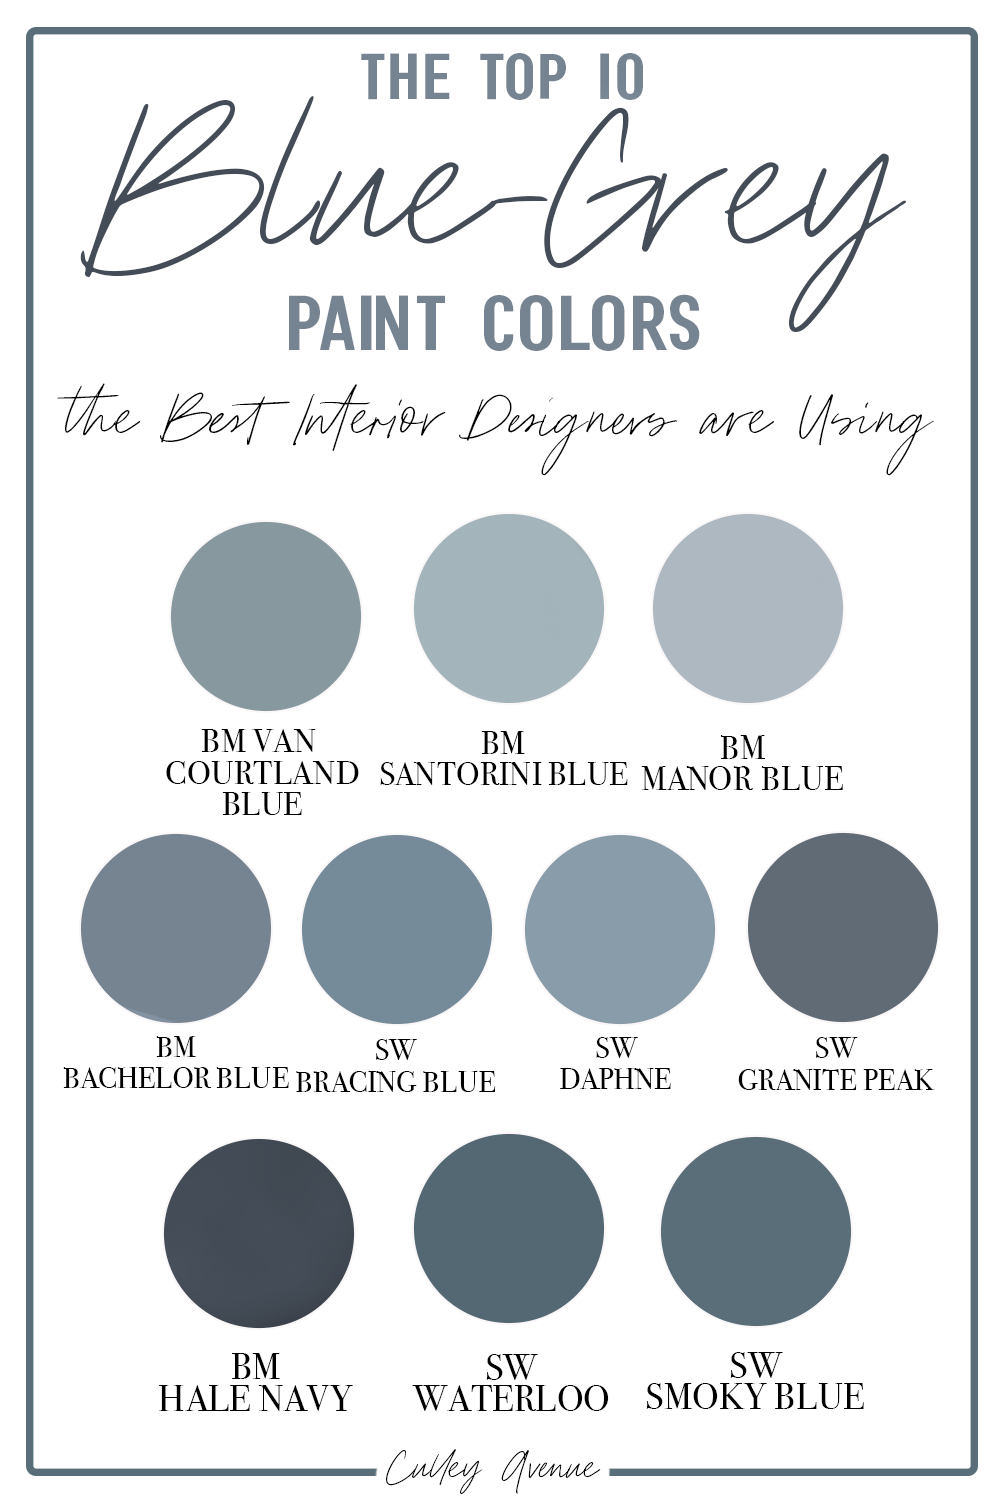 The Top 10 Blue Grey Paint Colors the Best Interior Designers are Using -  Culley Avenue